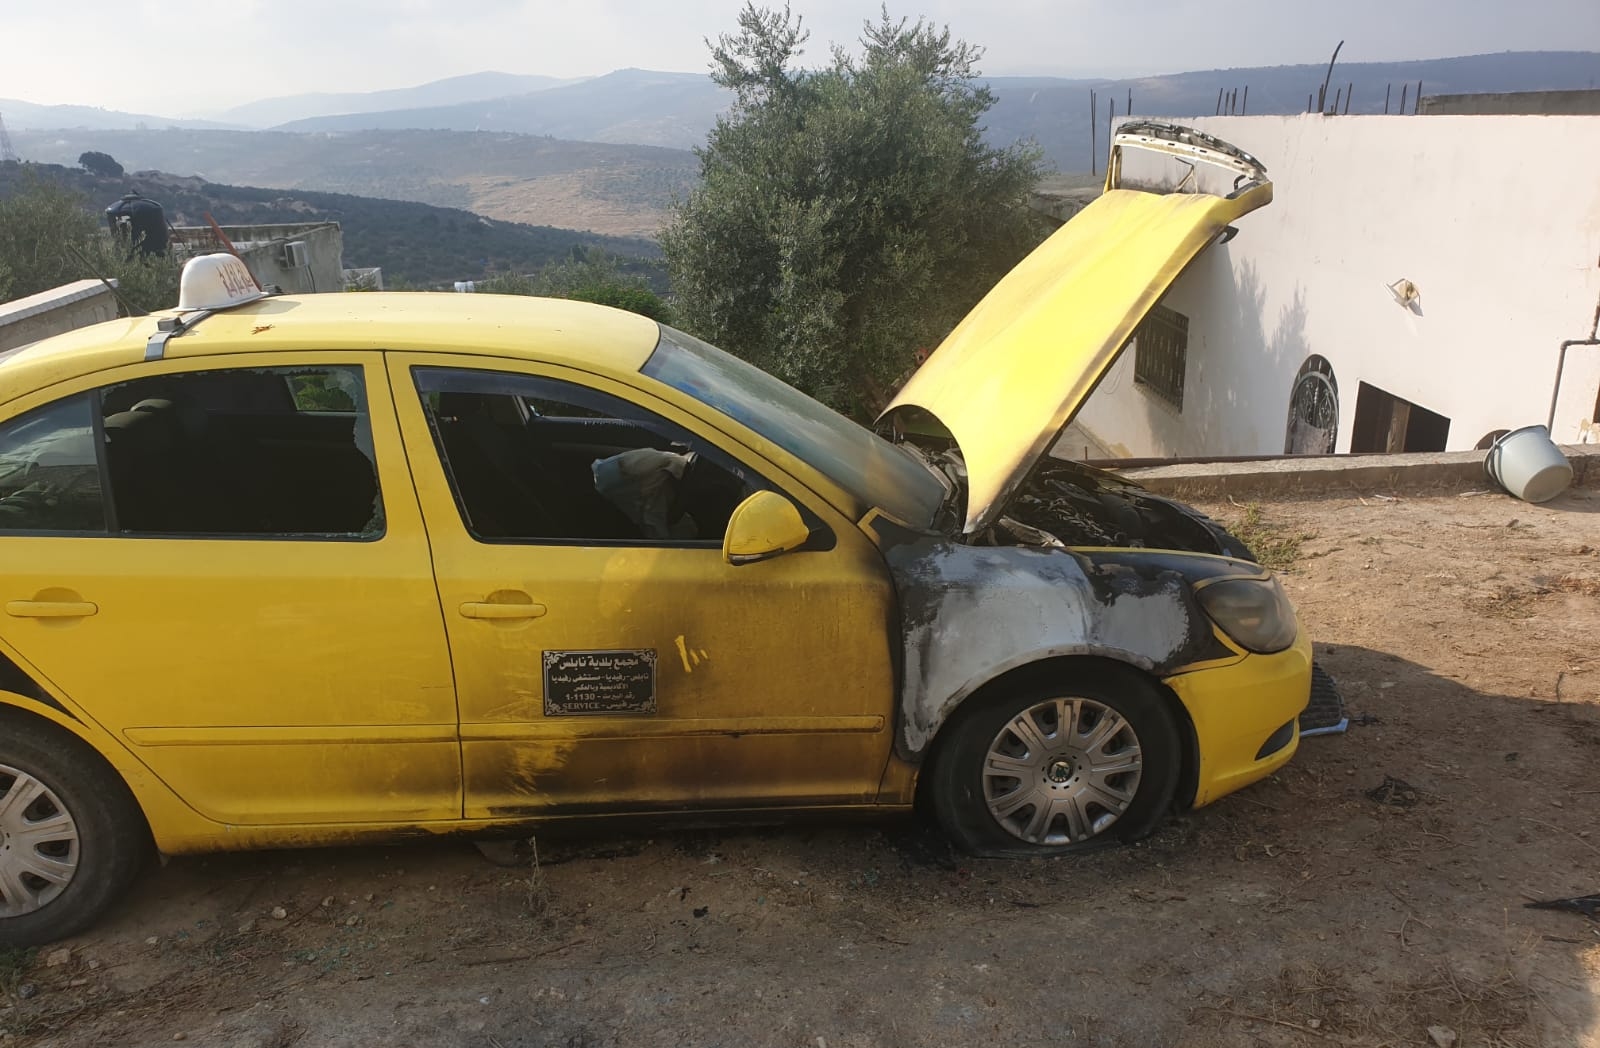 One of the two vehicles damaged by the arson attack in Faraata on 4 August 2020 (Supplied)